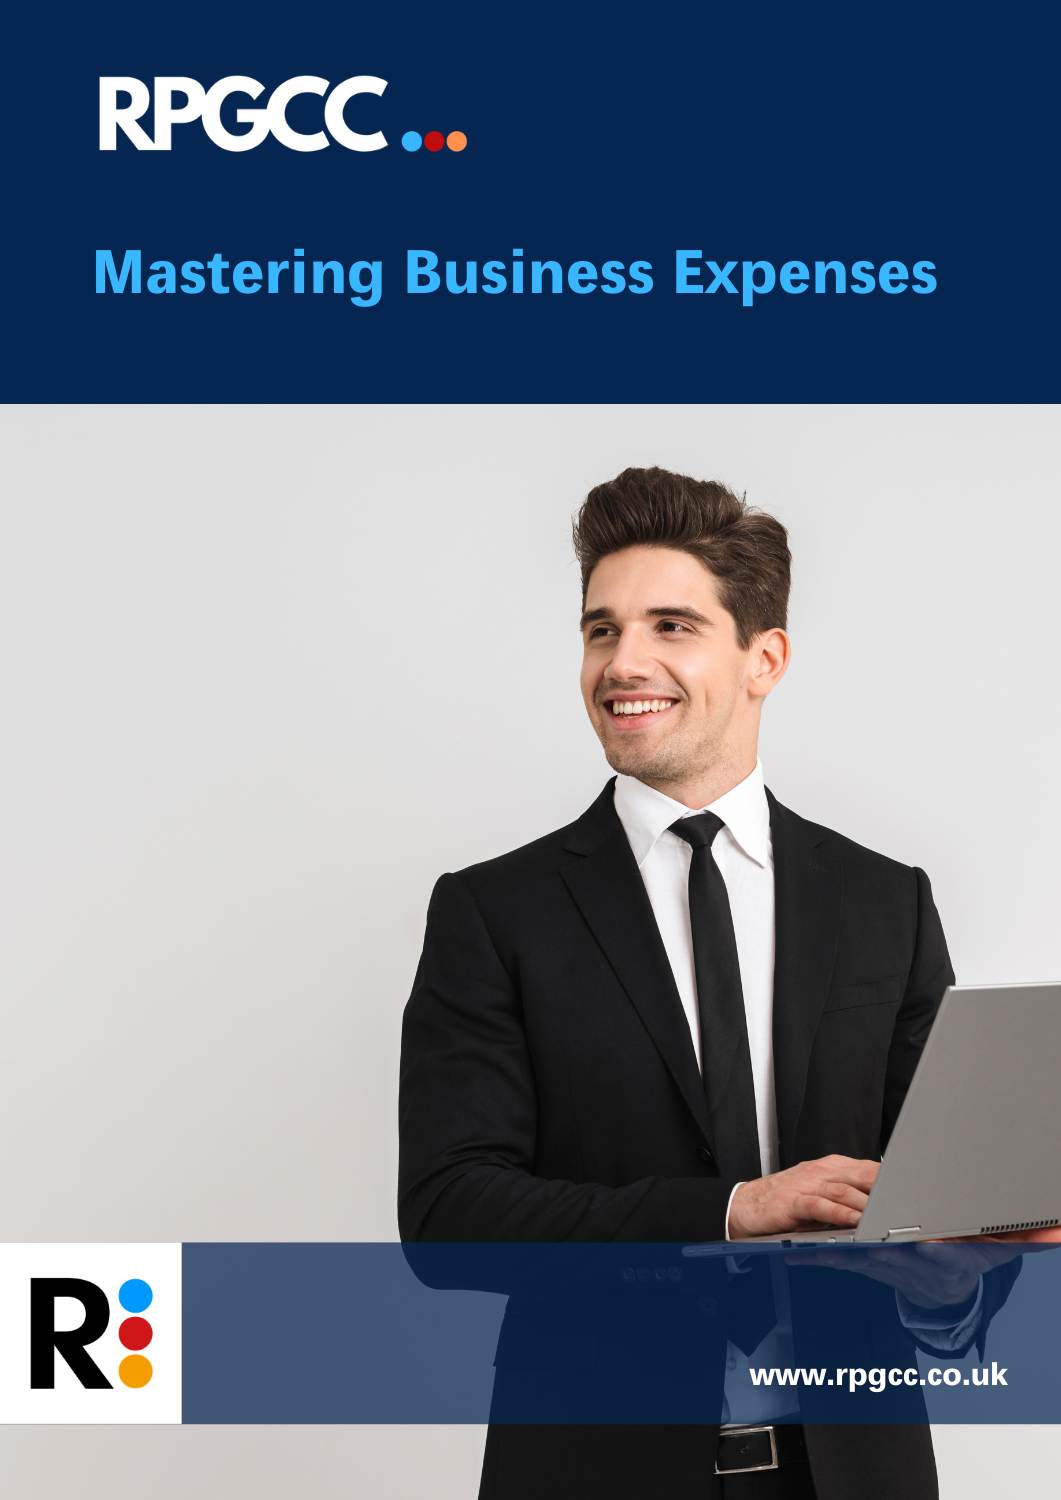 Mastering business expenses